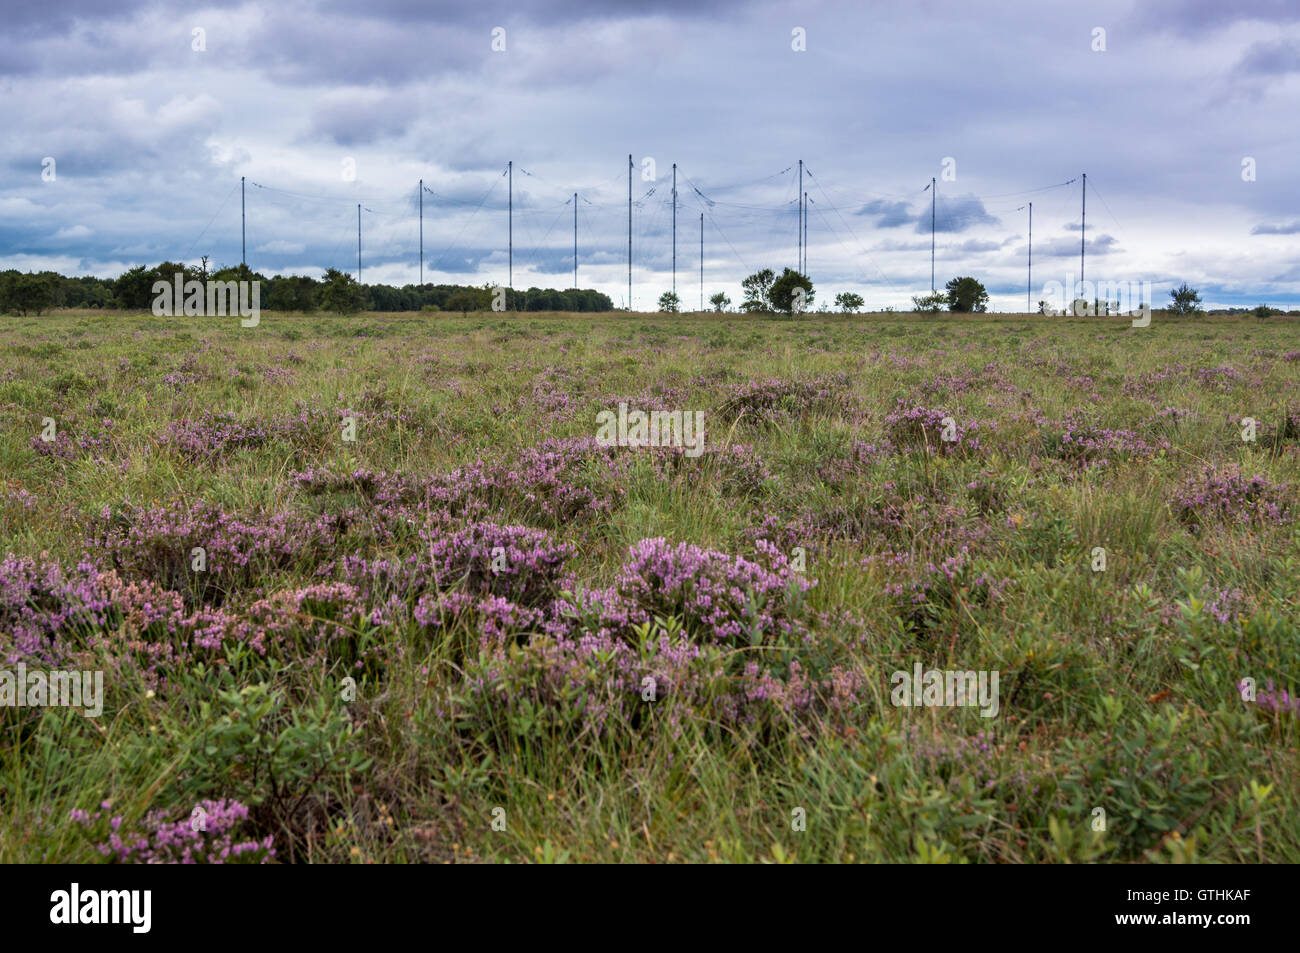 VLF transmitter masts, Anthorn radio station, Bowness Common, Campfield Marsh RSPB Reserve, Bowness-on Solway, Cumbria, England Stock Photo